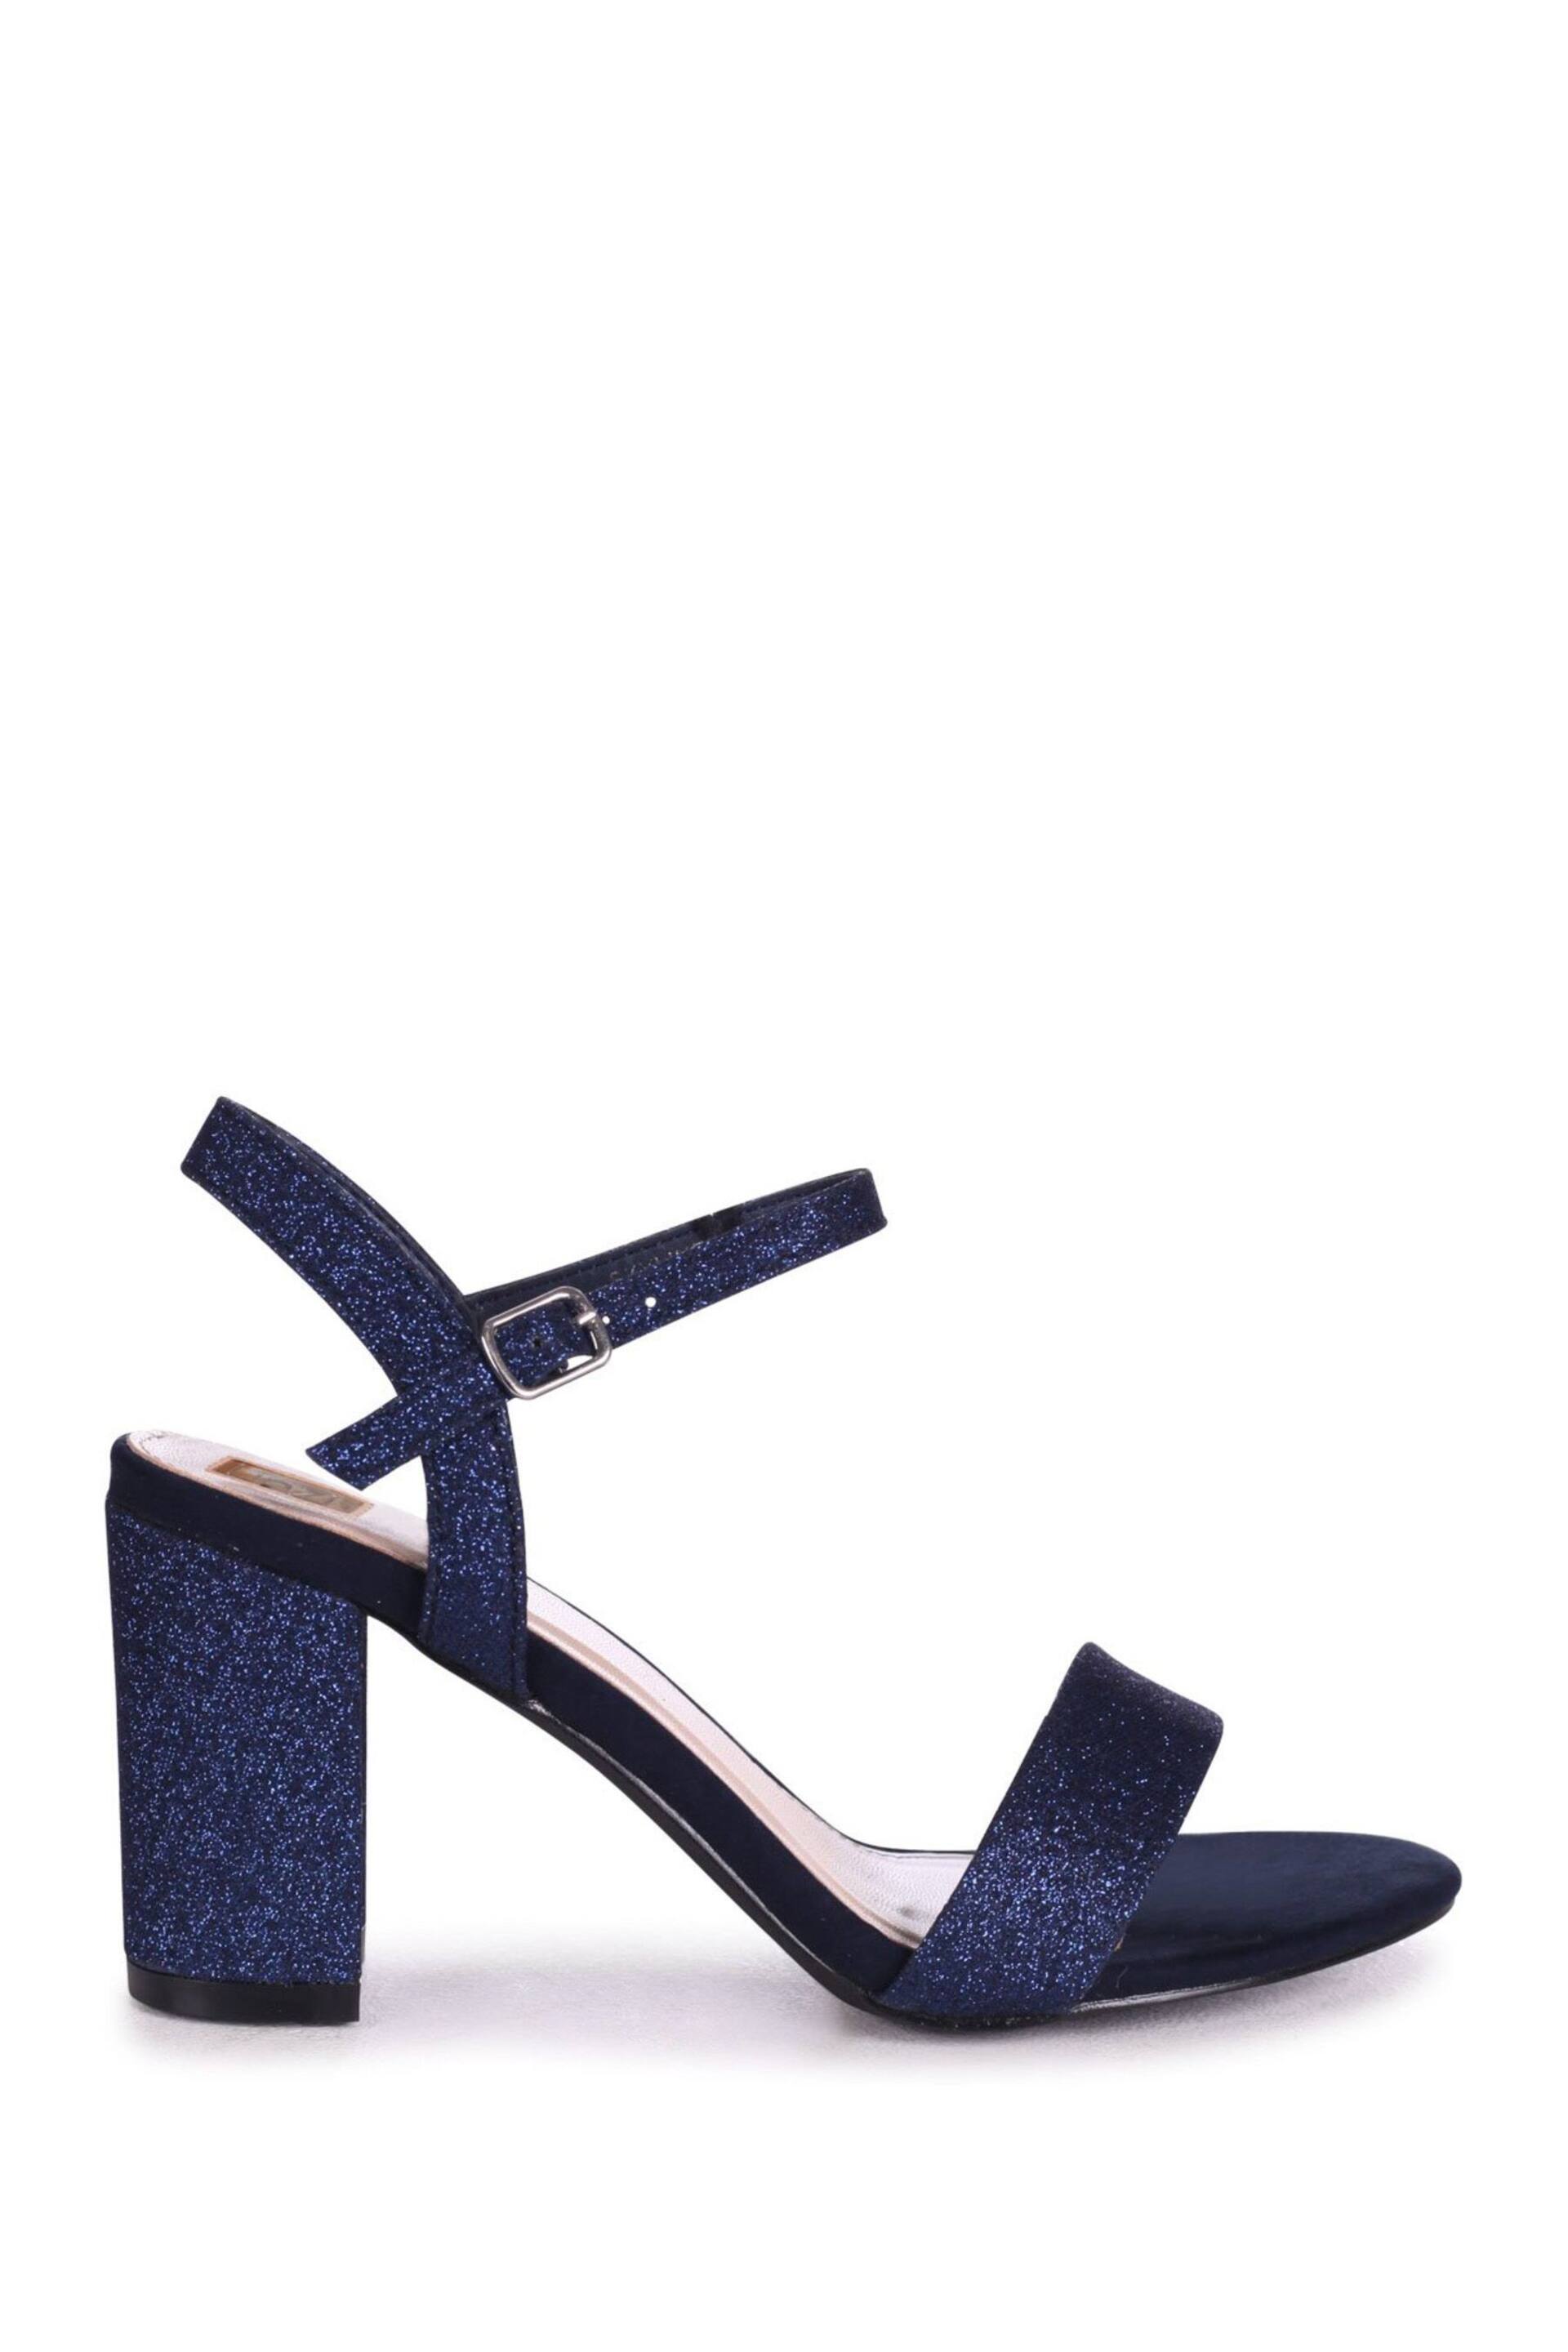 Linzi Navy Glitter Open Back Barely There Block Heeled Sandal - Image 2 of 4